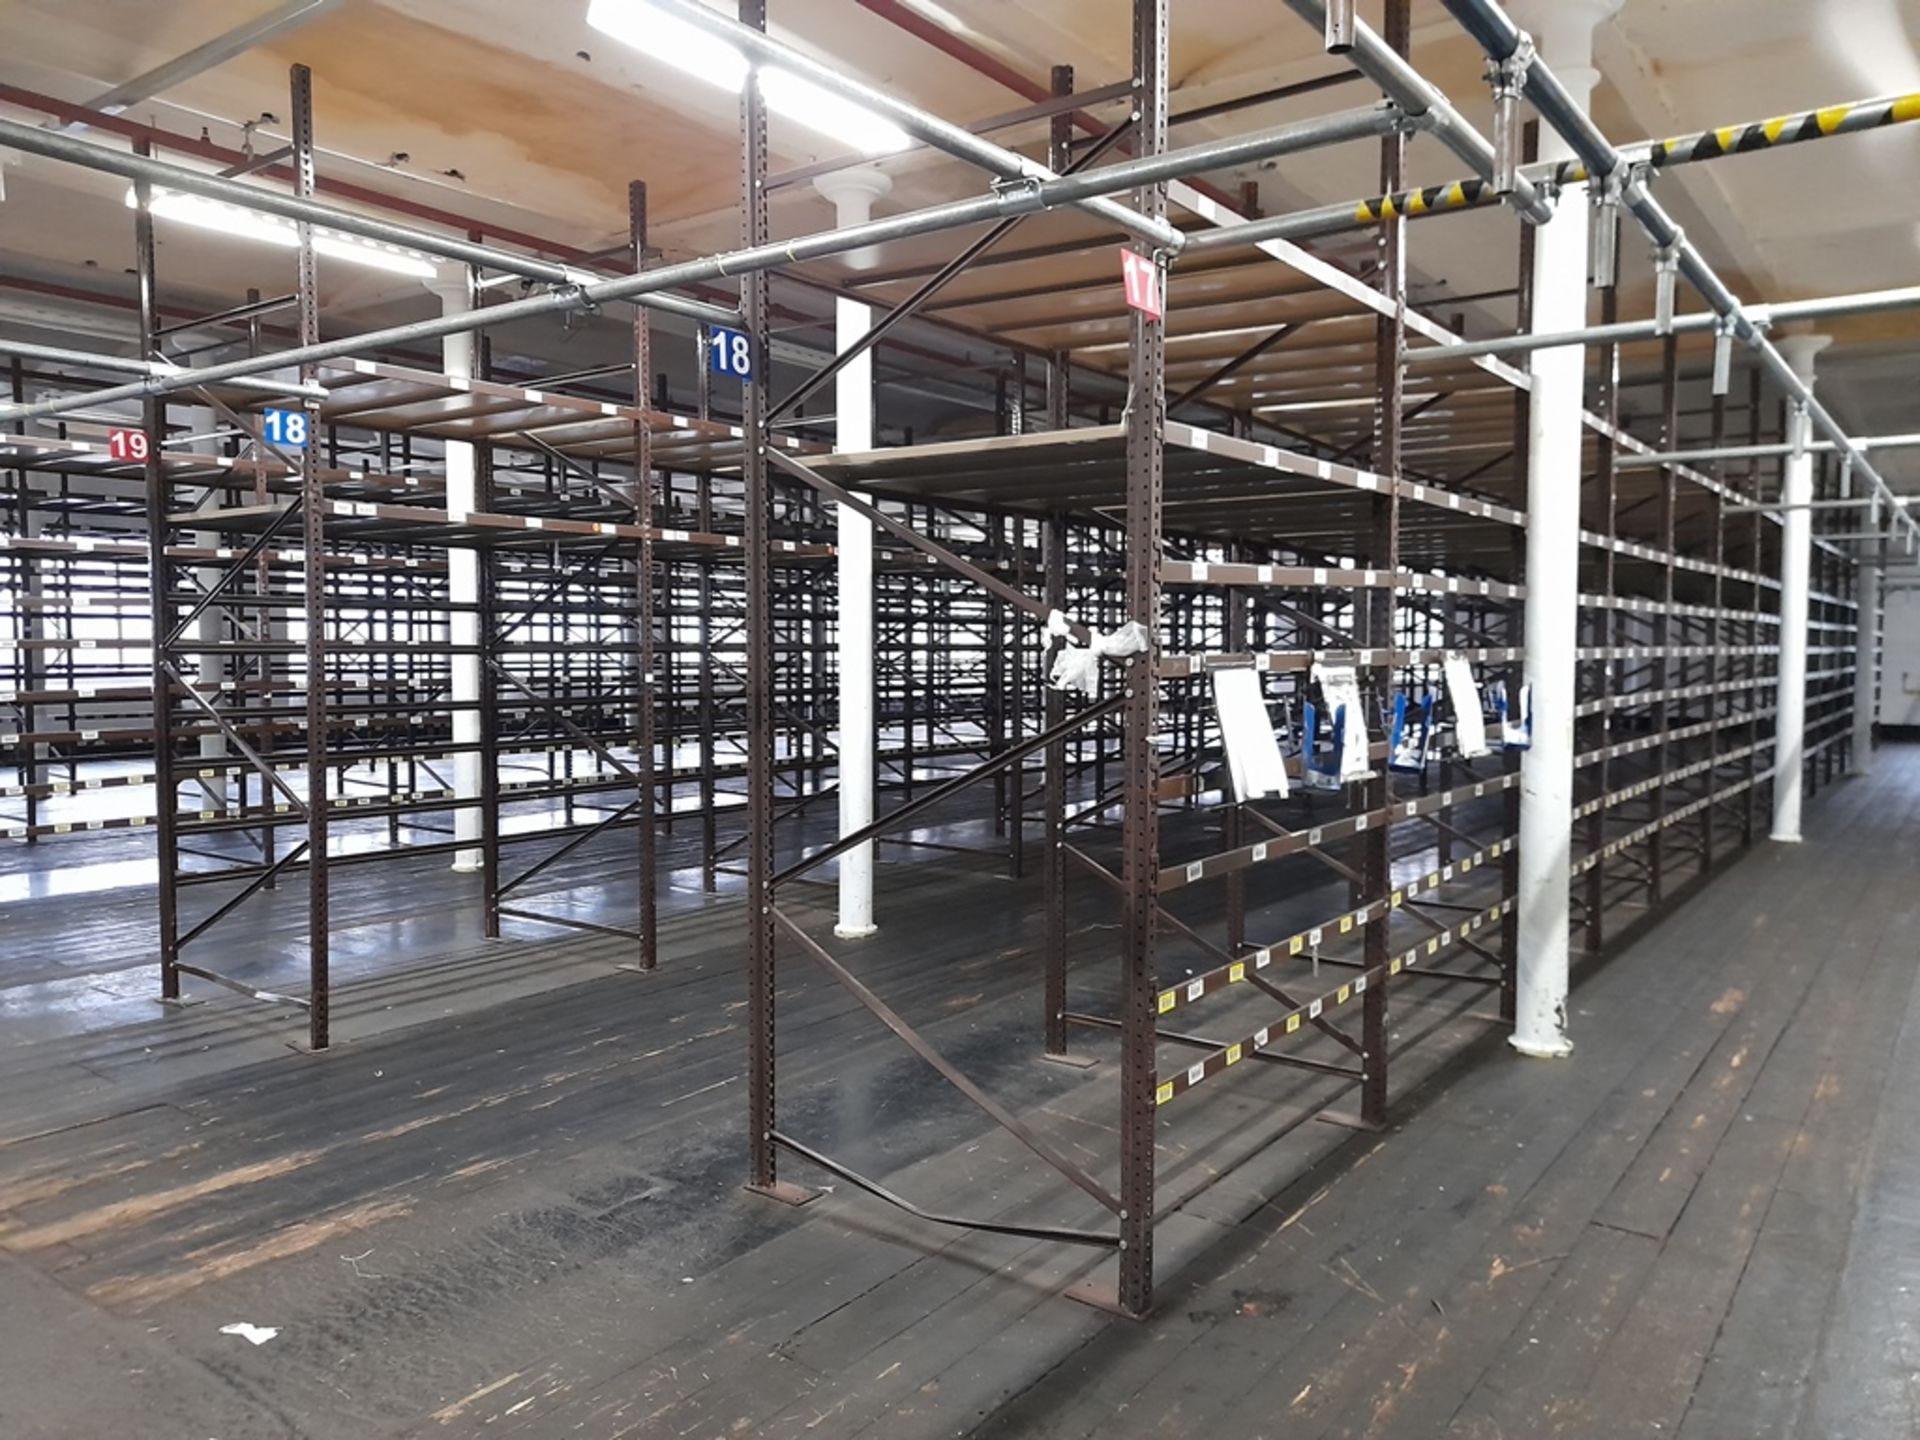 Light duty metal storage shelving racking - 115 bays, each with 5 pairs of beams and 20 metal